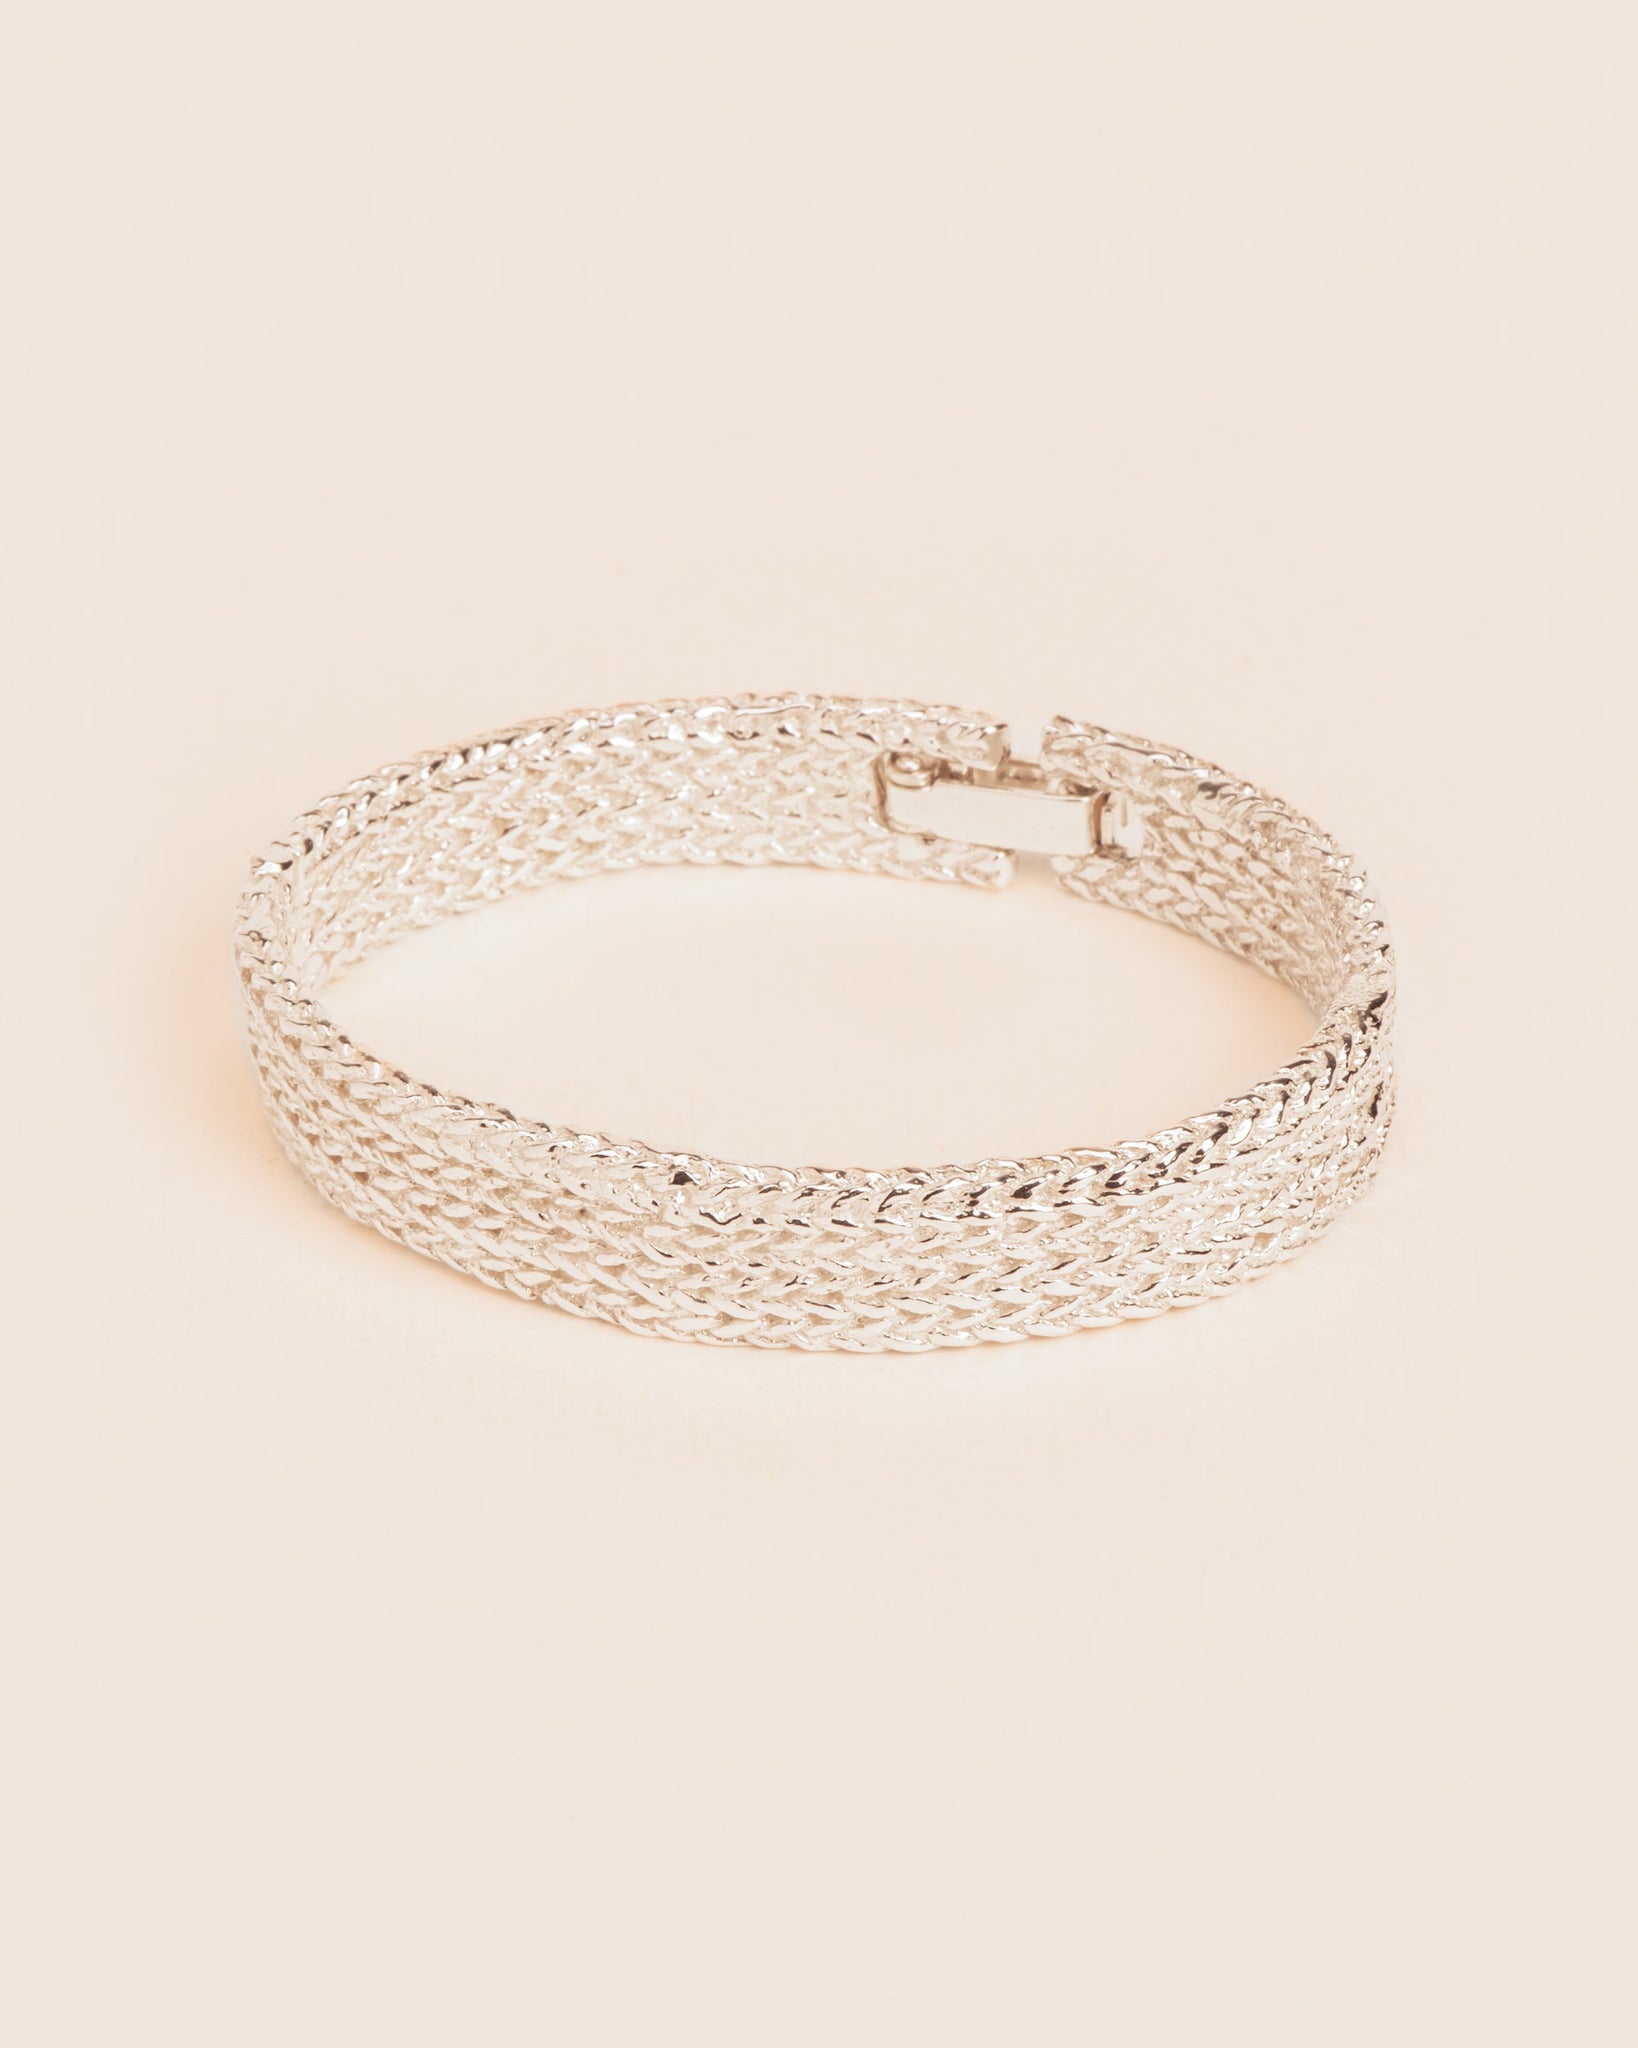 Bracelet with knit texture in silver